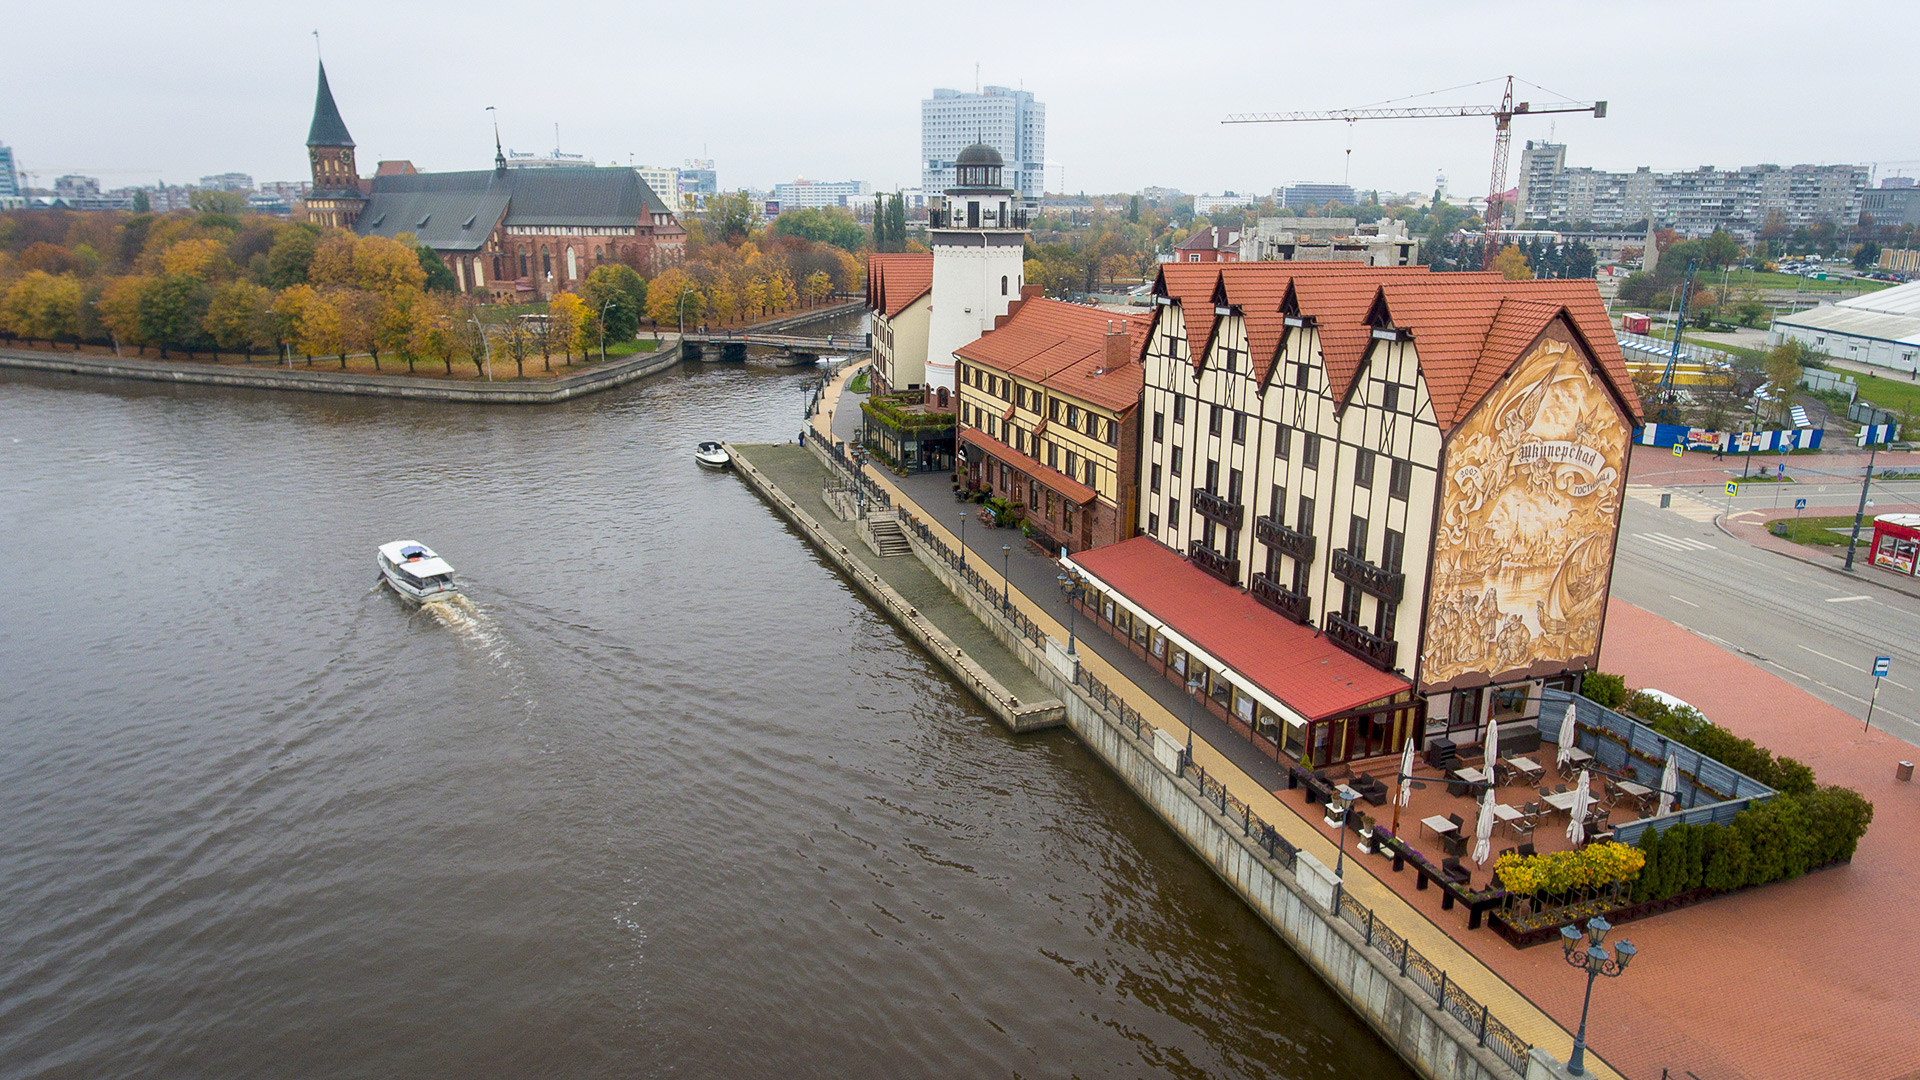 Bitcoin can save you in Kaliningrad, where a hotel room goes for at least $300 per night.